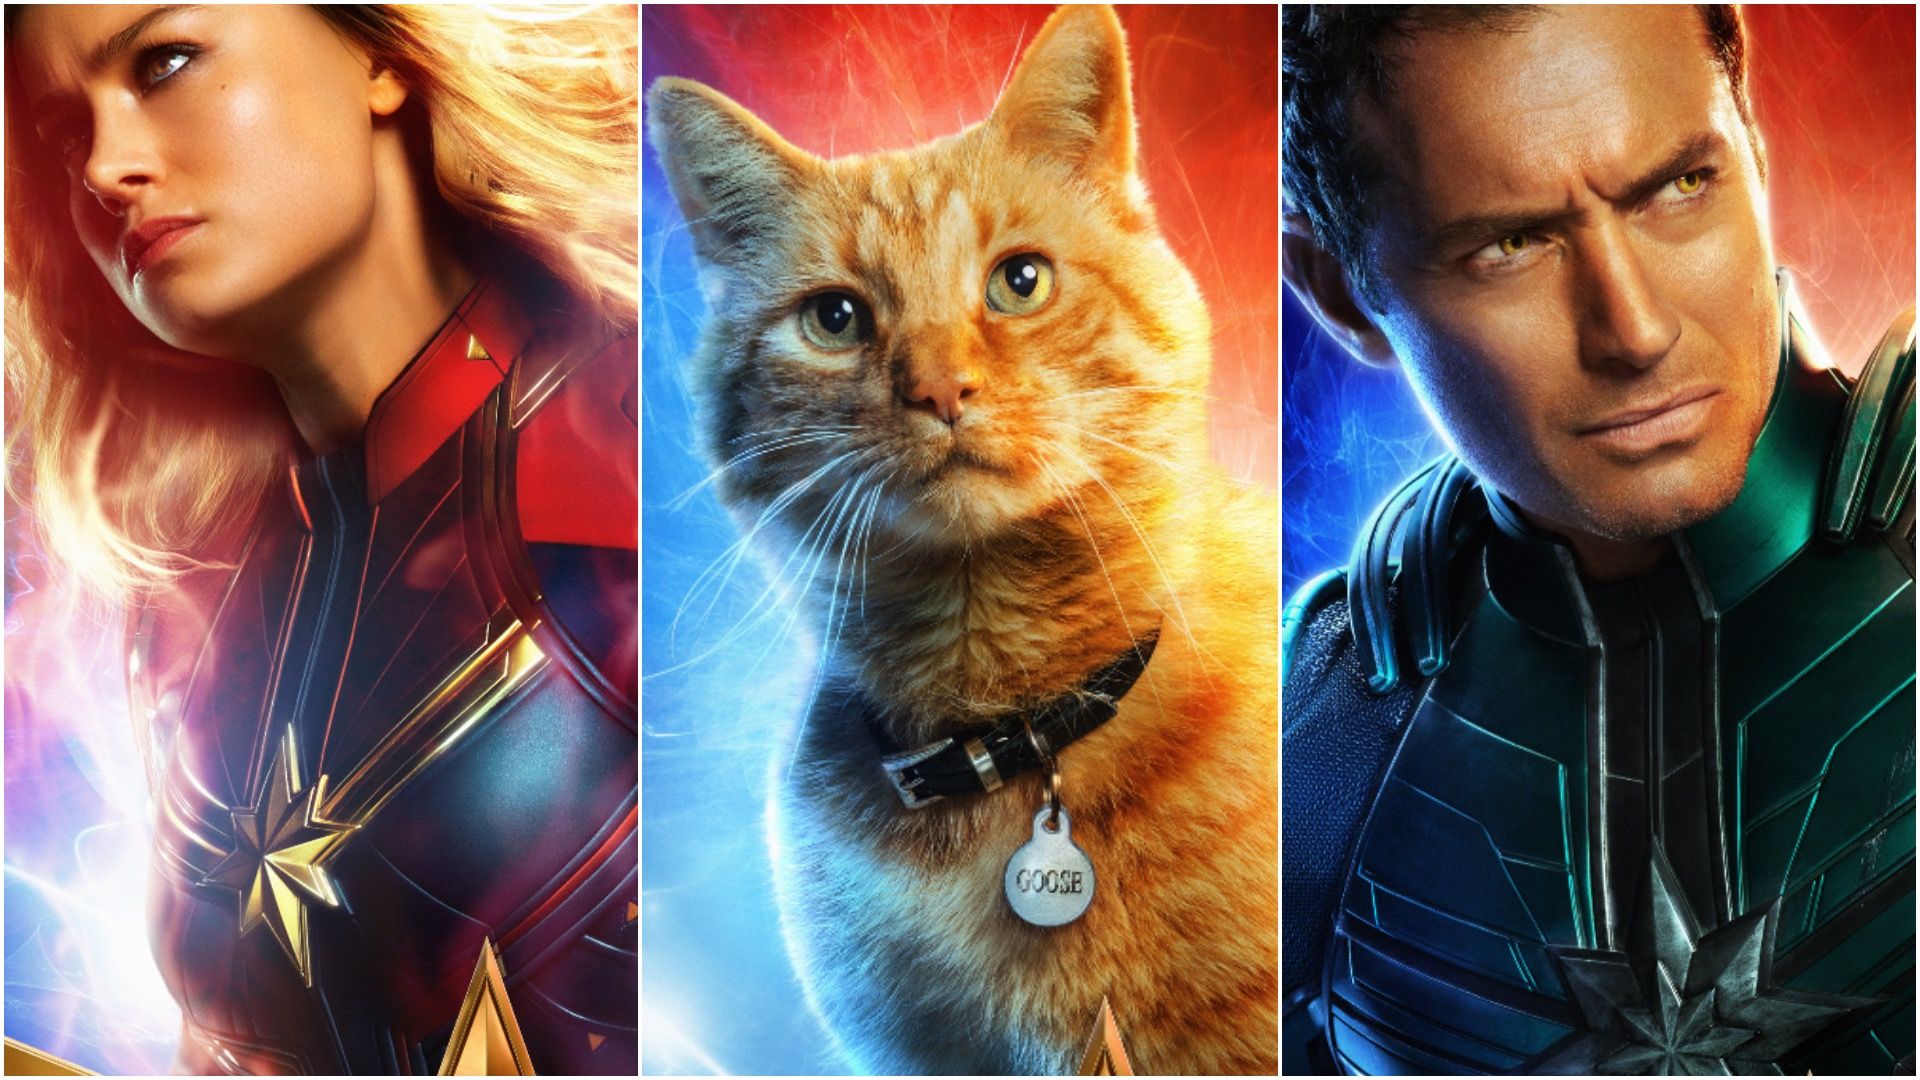 Captain Marvel Gets 10 New Character Posters (Including Goose the Cat)